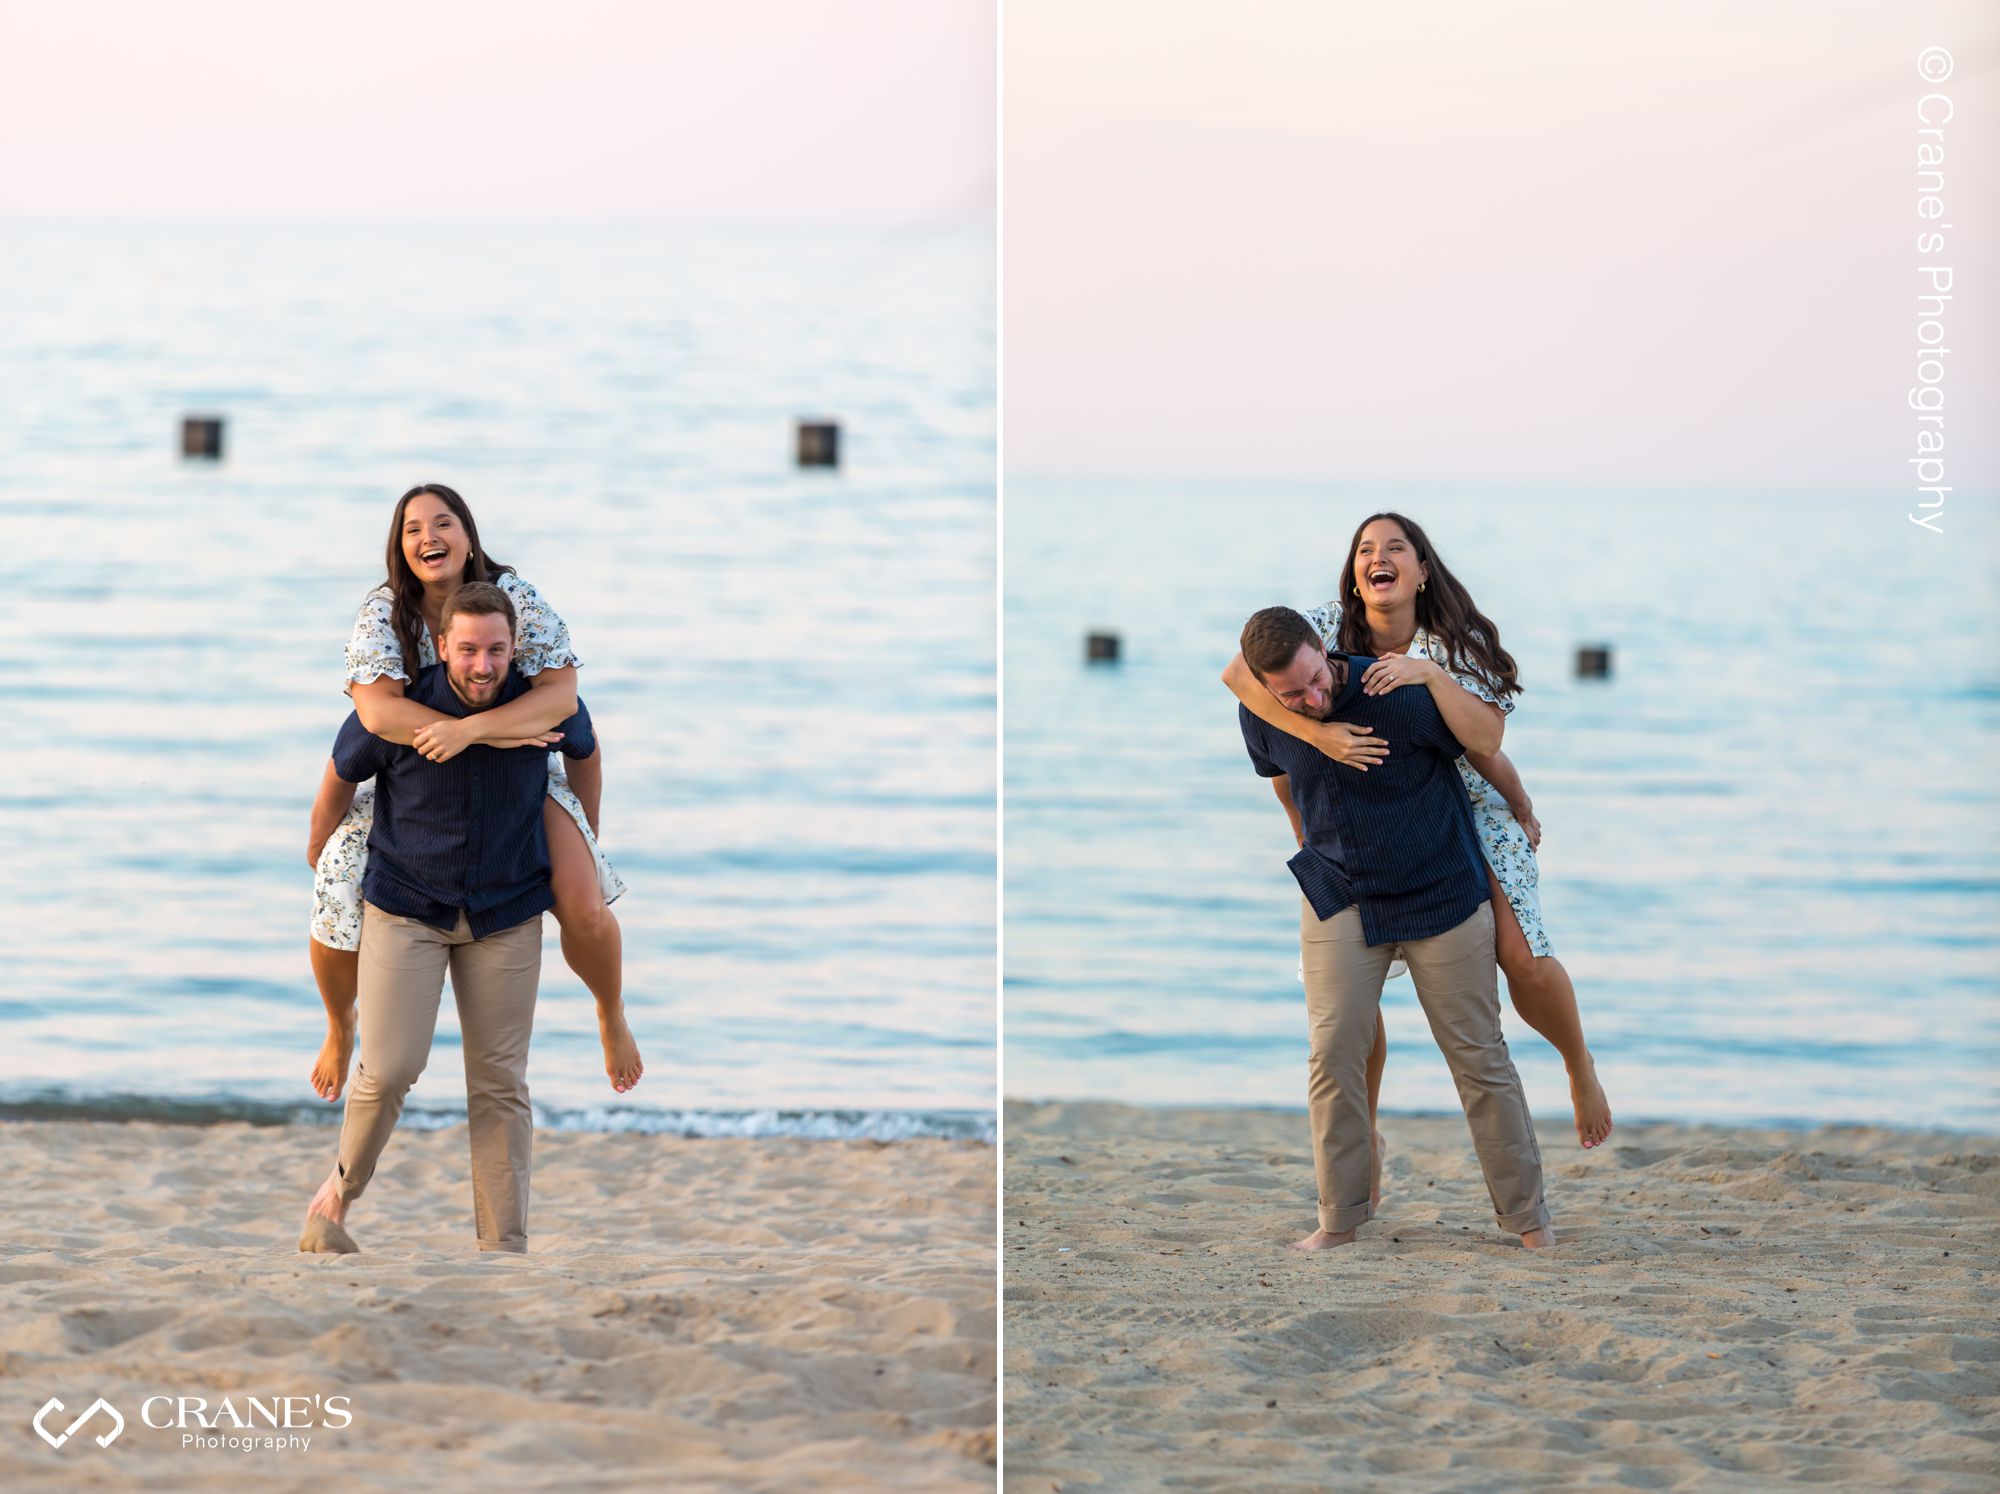 A fun engagement session at North Ave beach with Lake Michigan in the background